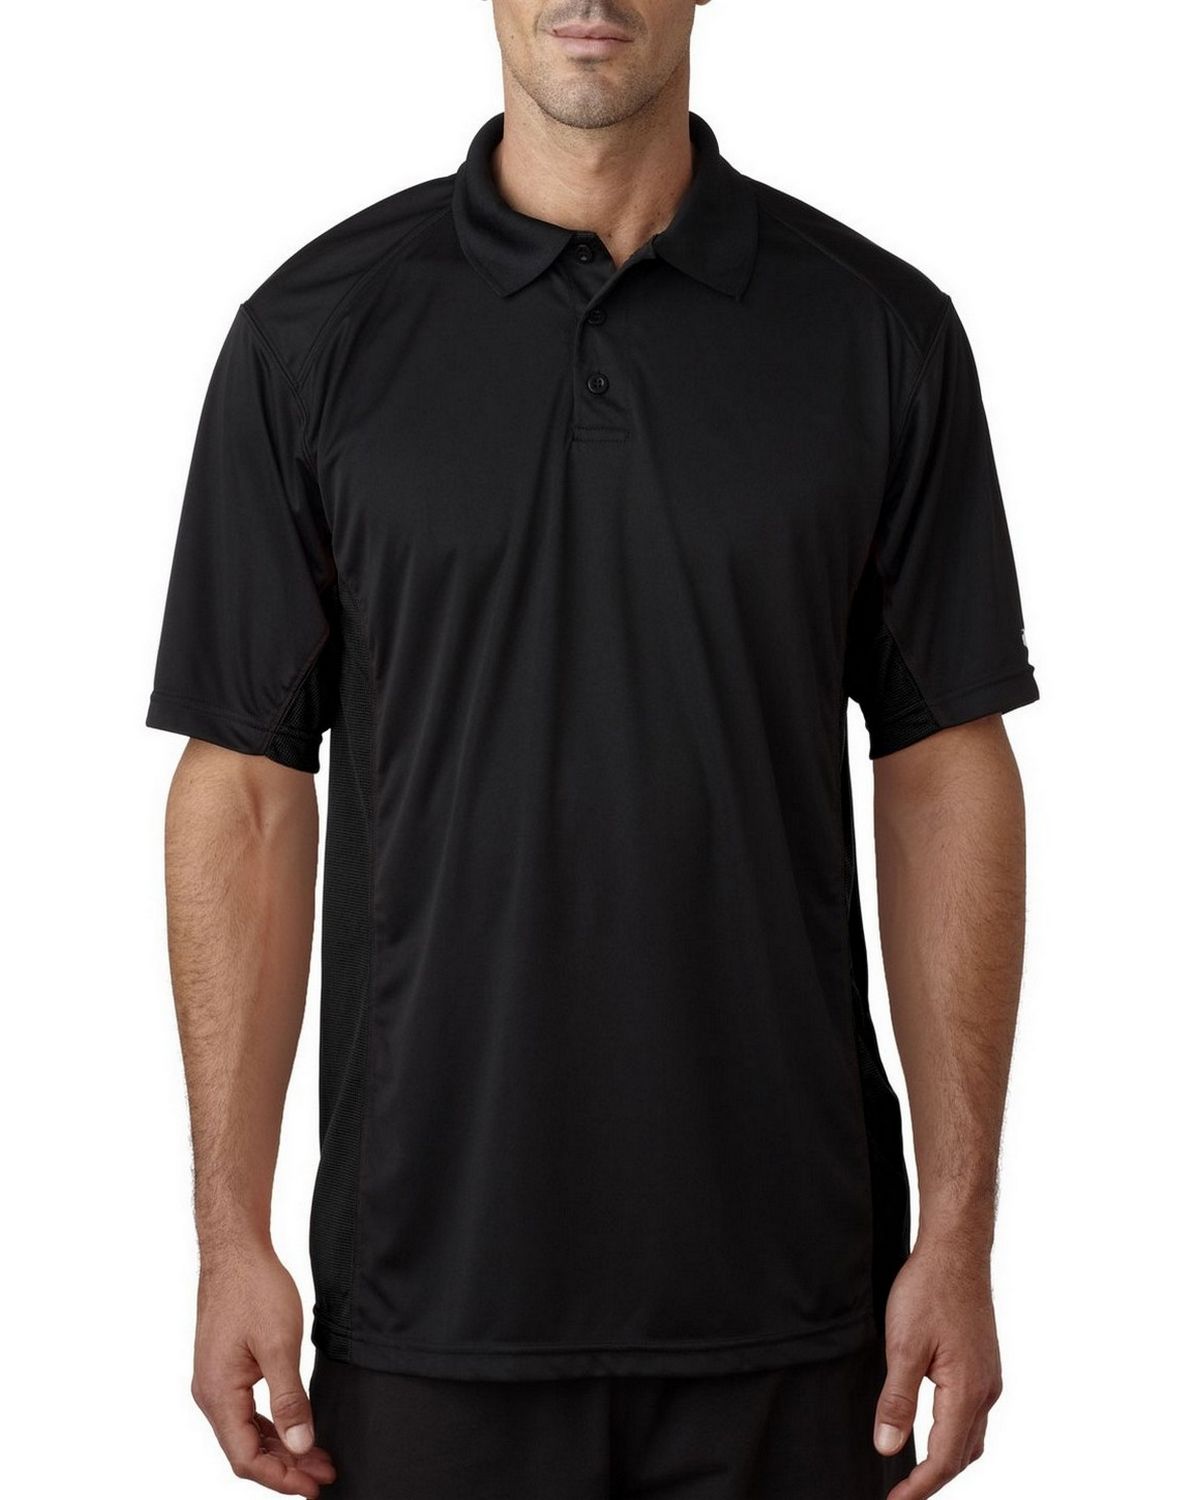 Badger 4440 BT5 Solid Color Polo.